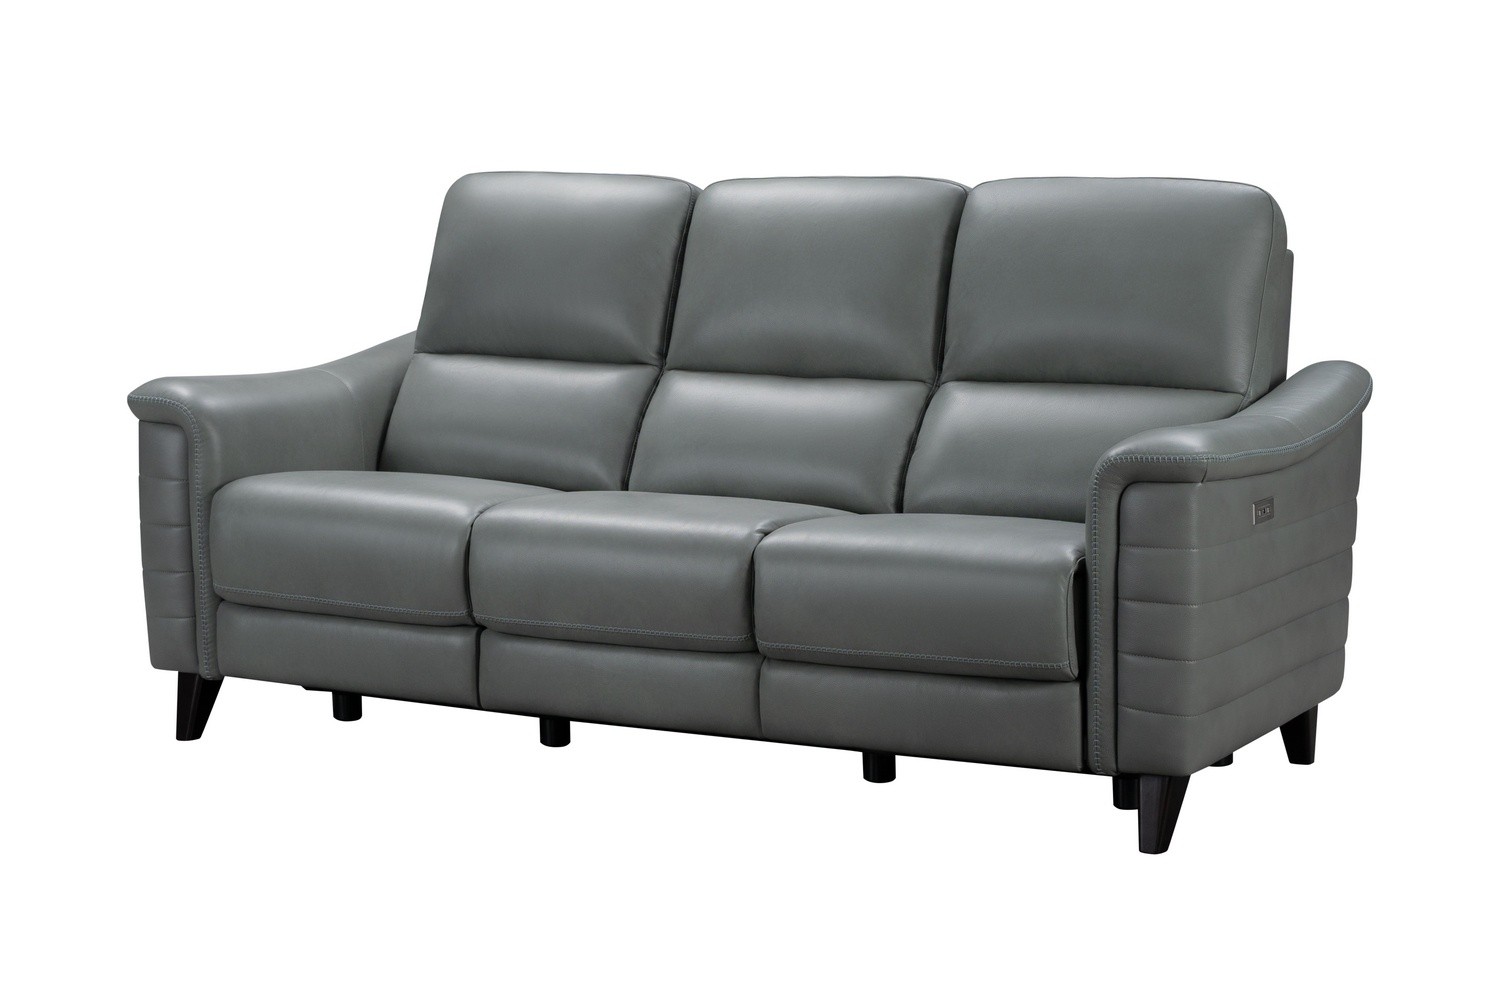 Barcalounger Malone Power Reclining Sofa with Power Head Rests - Antonio Green Gray/Leather Match